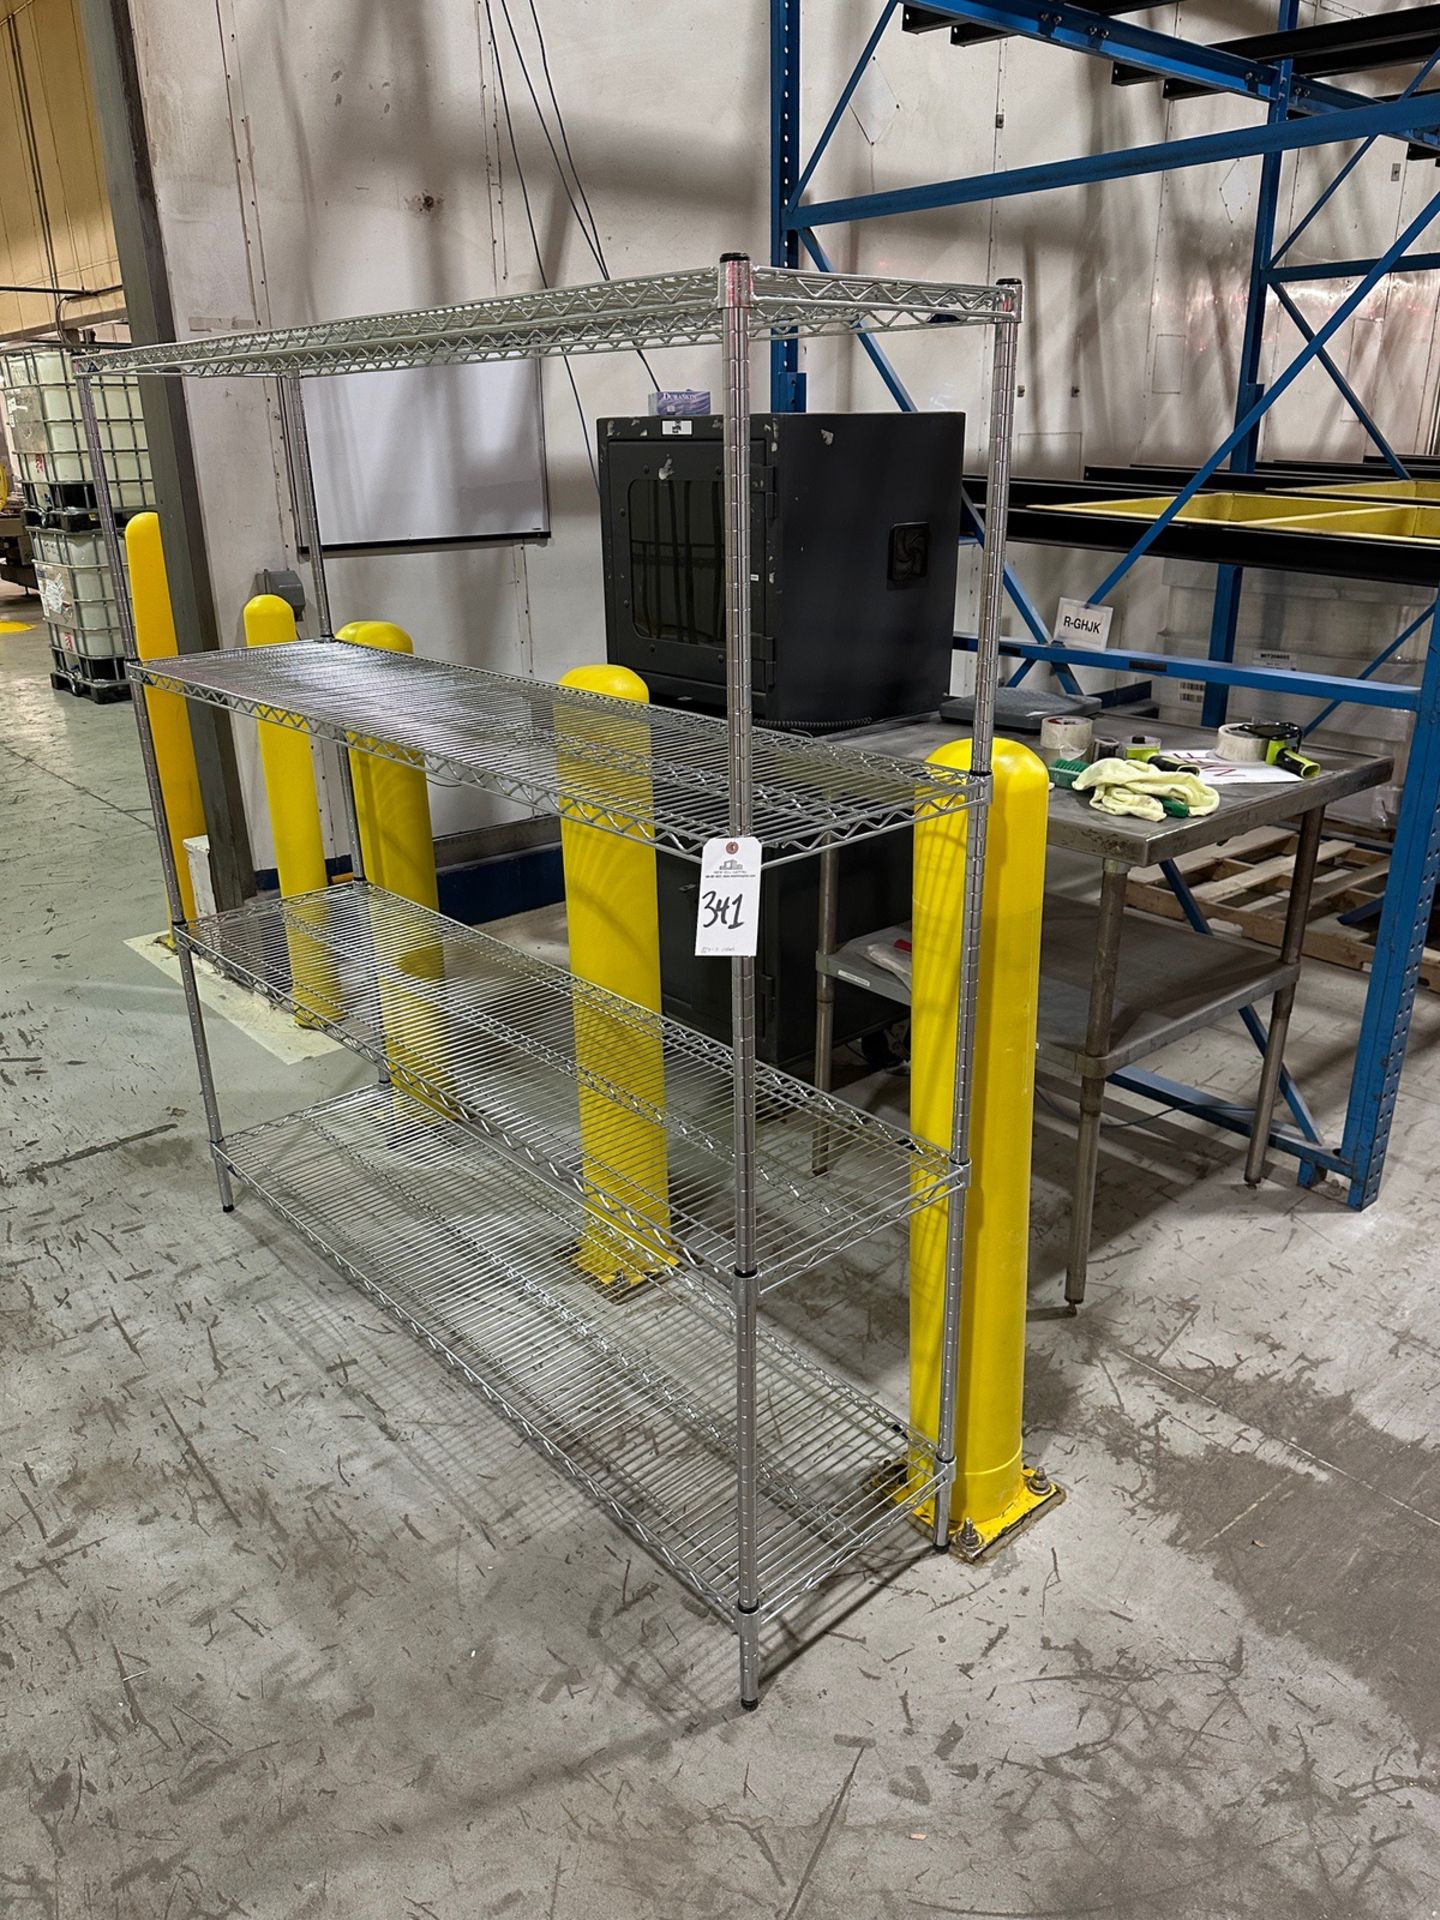 Lot of Stainless Steel Table (3' x 3'), Wire Shelving Unit (6' x 18" x 6') and Comp | Rig Fee $25